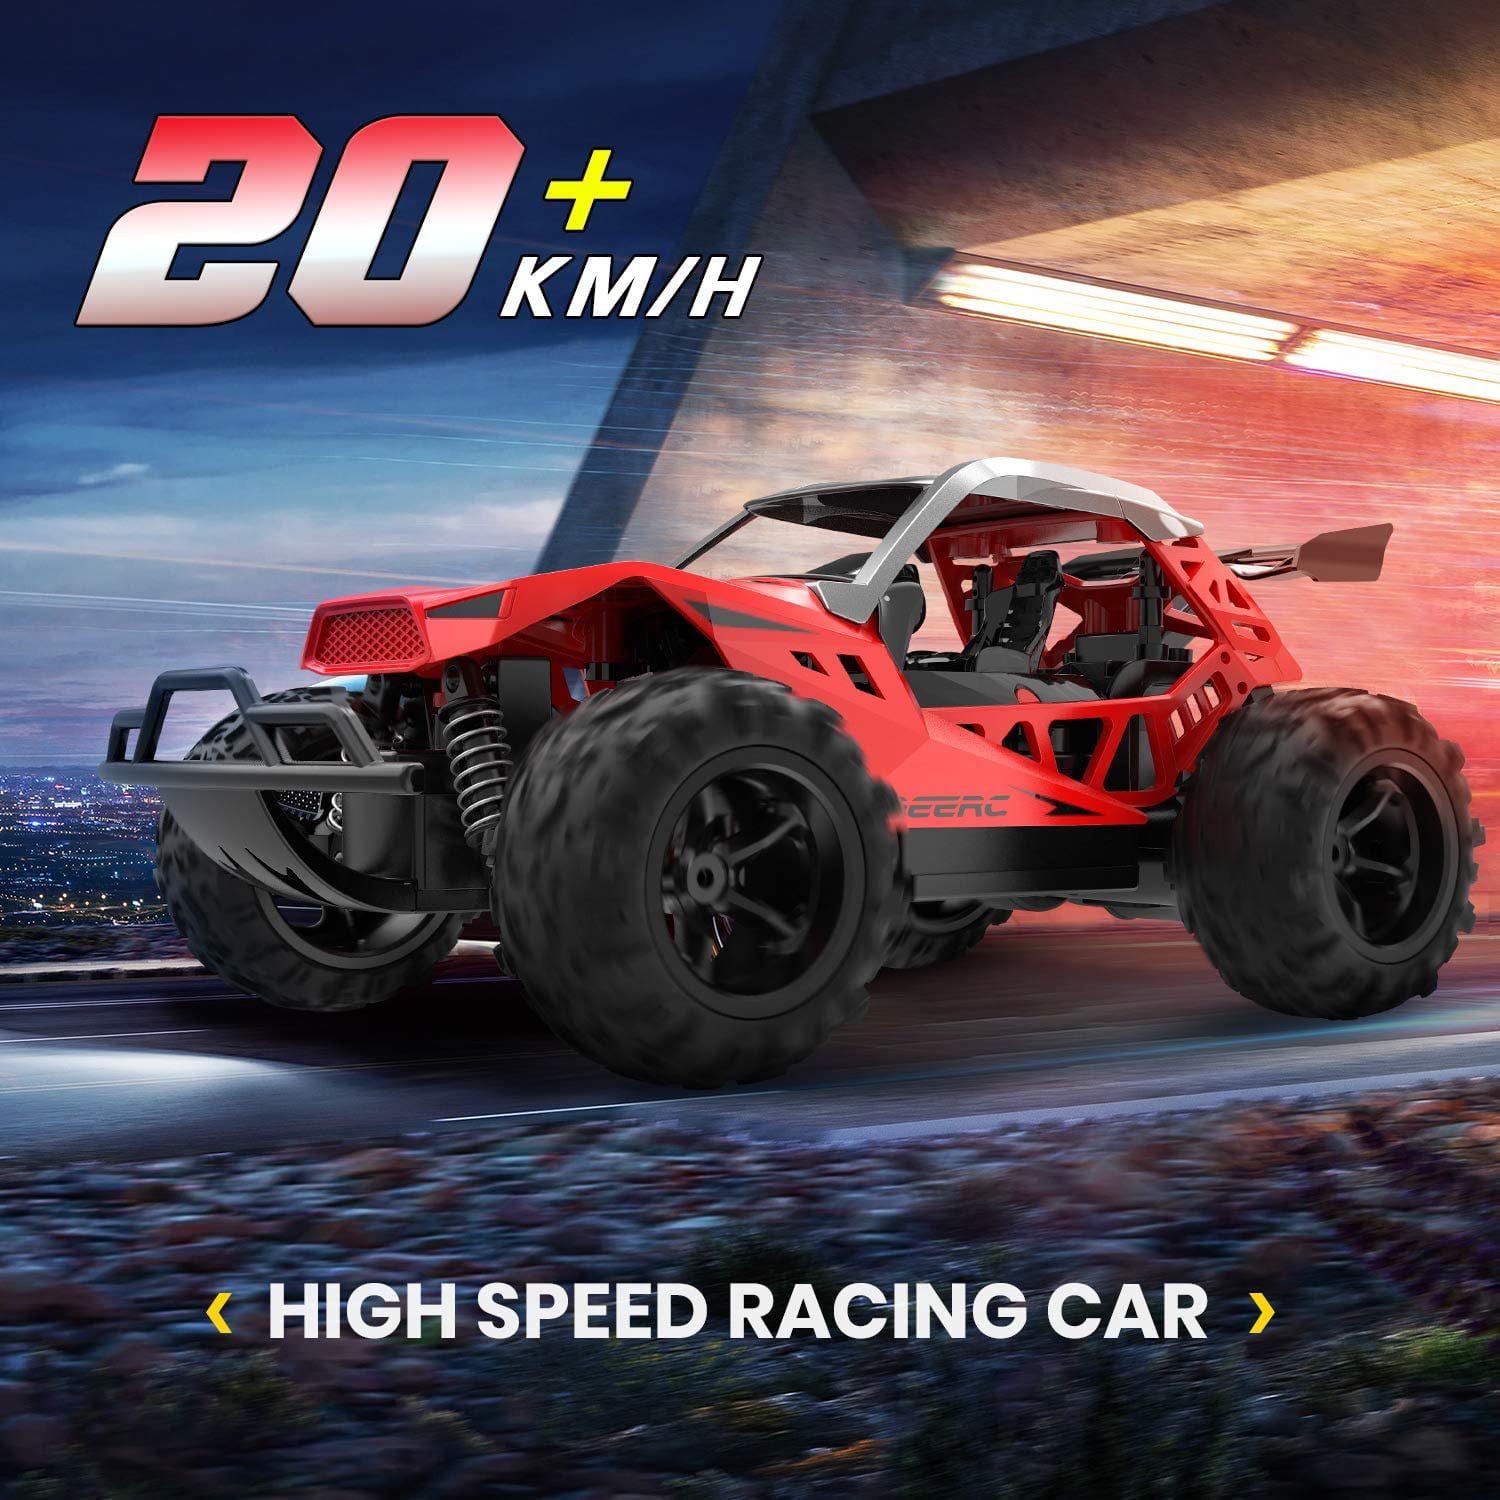 DEERC Remote Control Car for Kids Electric Monster Truck Off-Road Vehicle High-Speed RC Car 2.4GHz 20 KM/H 1:22 Scale Toys Gifts for Children